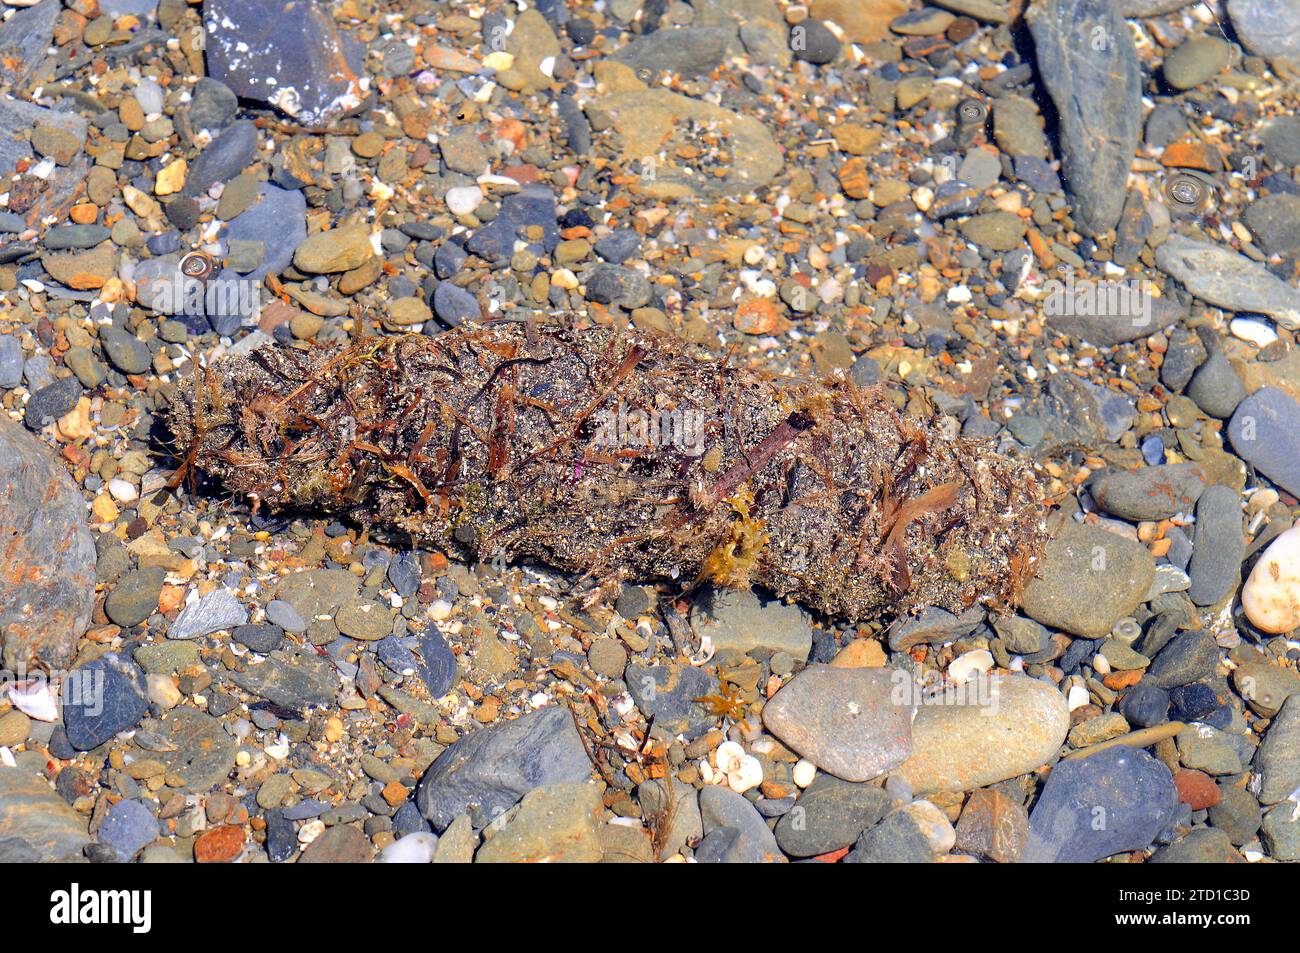 Tubular sea cucumber (Holothuria tubulosa) is a species of sea cucumber feeds on detritus and plankton. Cryptic specimen covered with remains of Posid Stock Photo